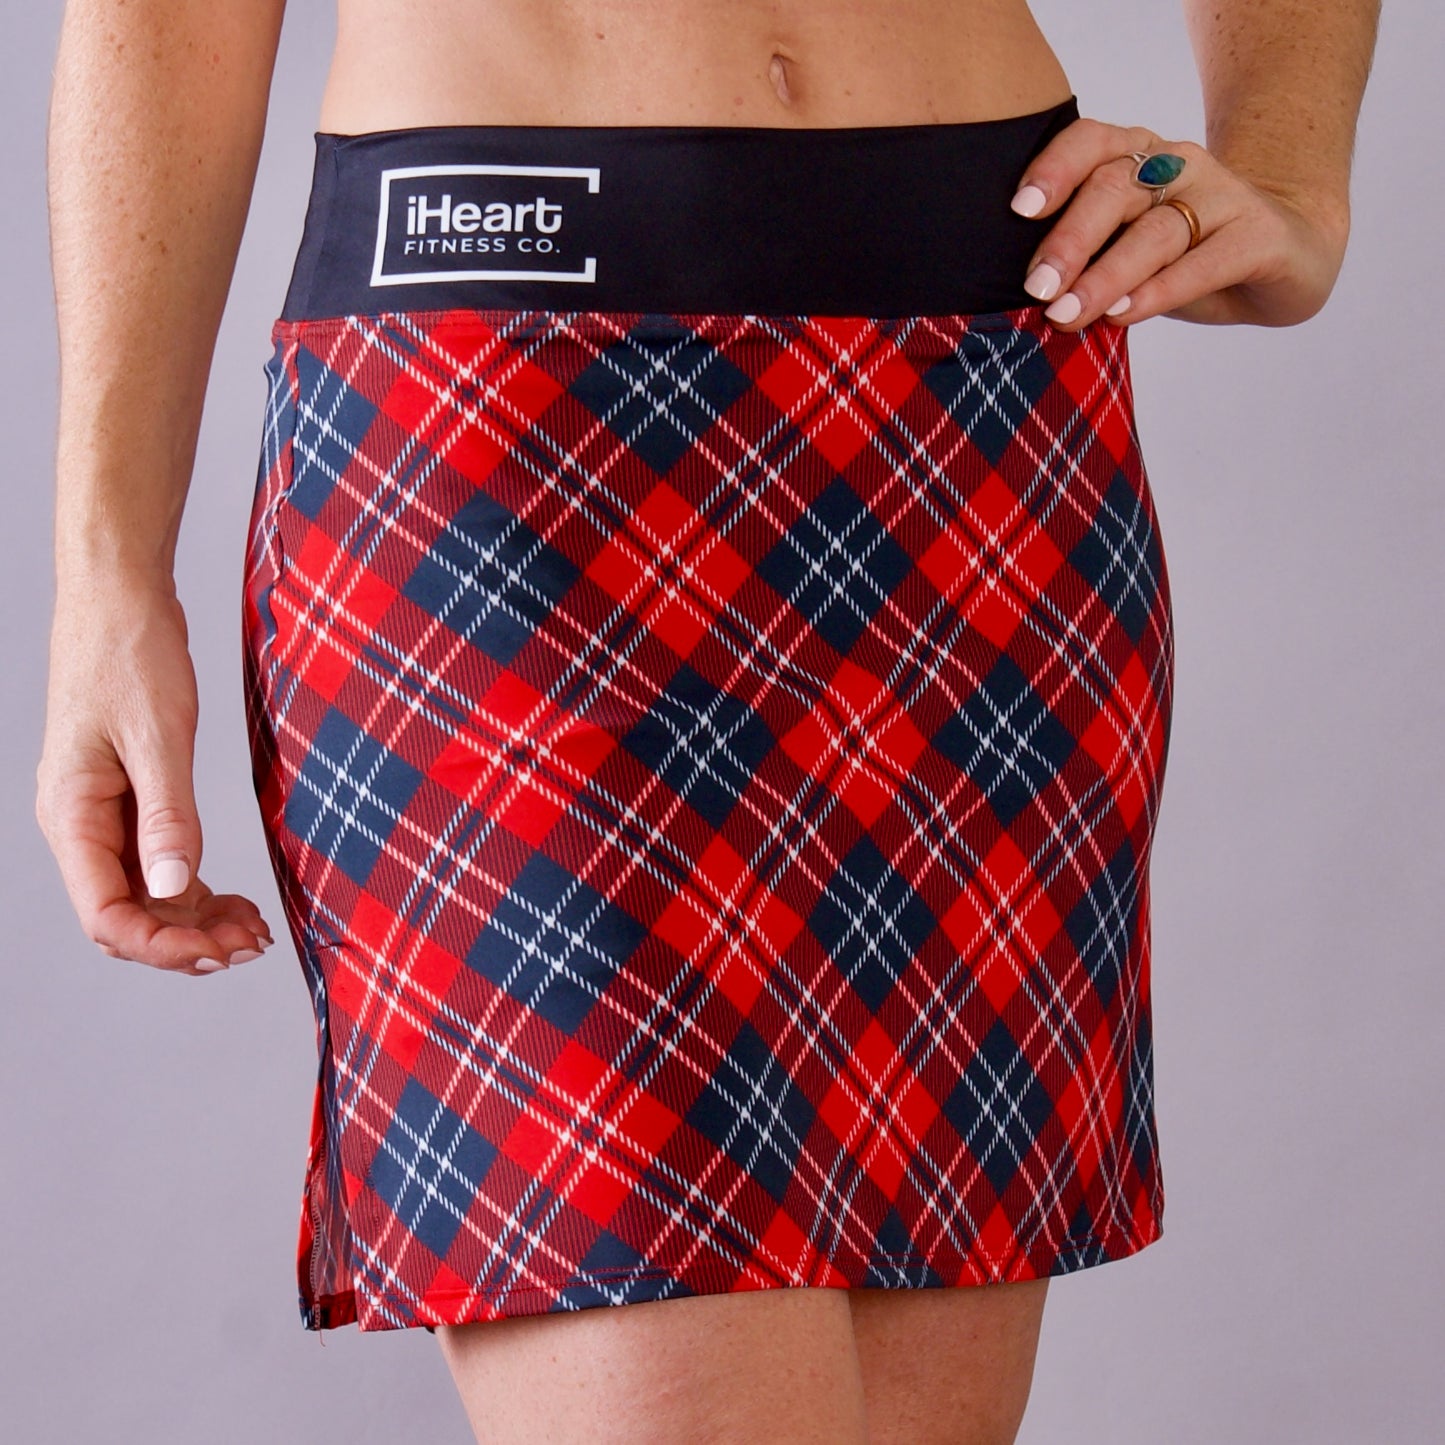 The Red Plaid Skort for Women